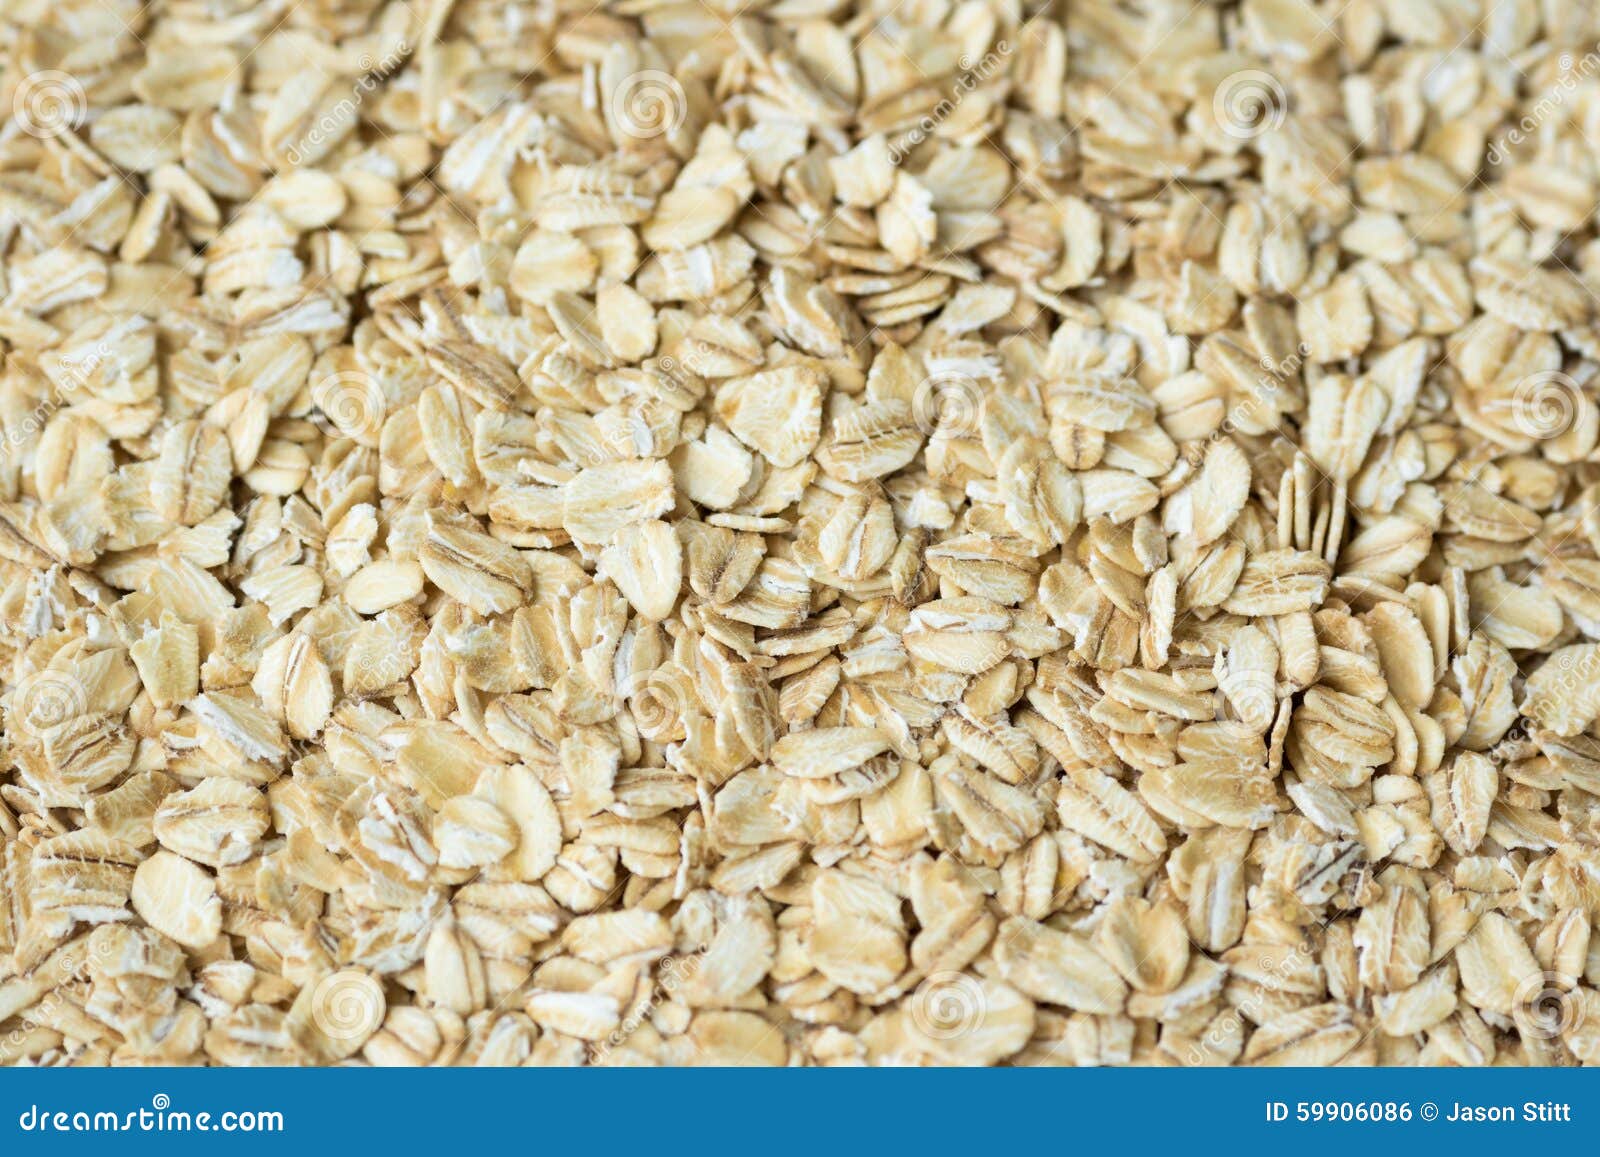 Rolled Oats stock photo. Image of organic, closeup, healthy - 59906086